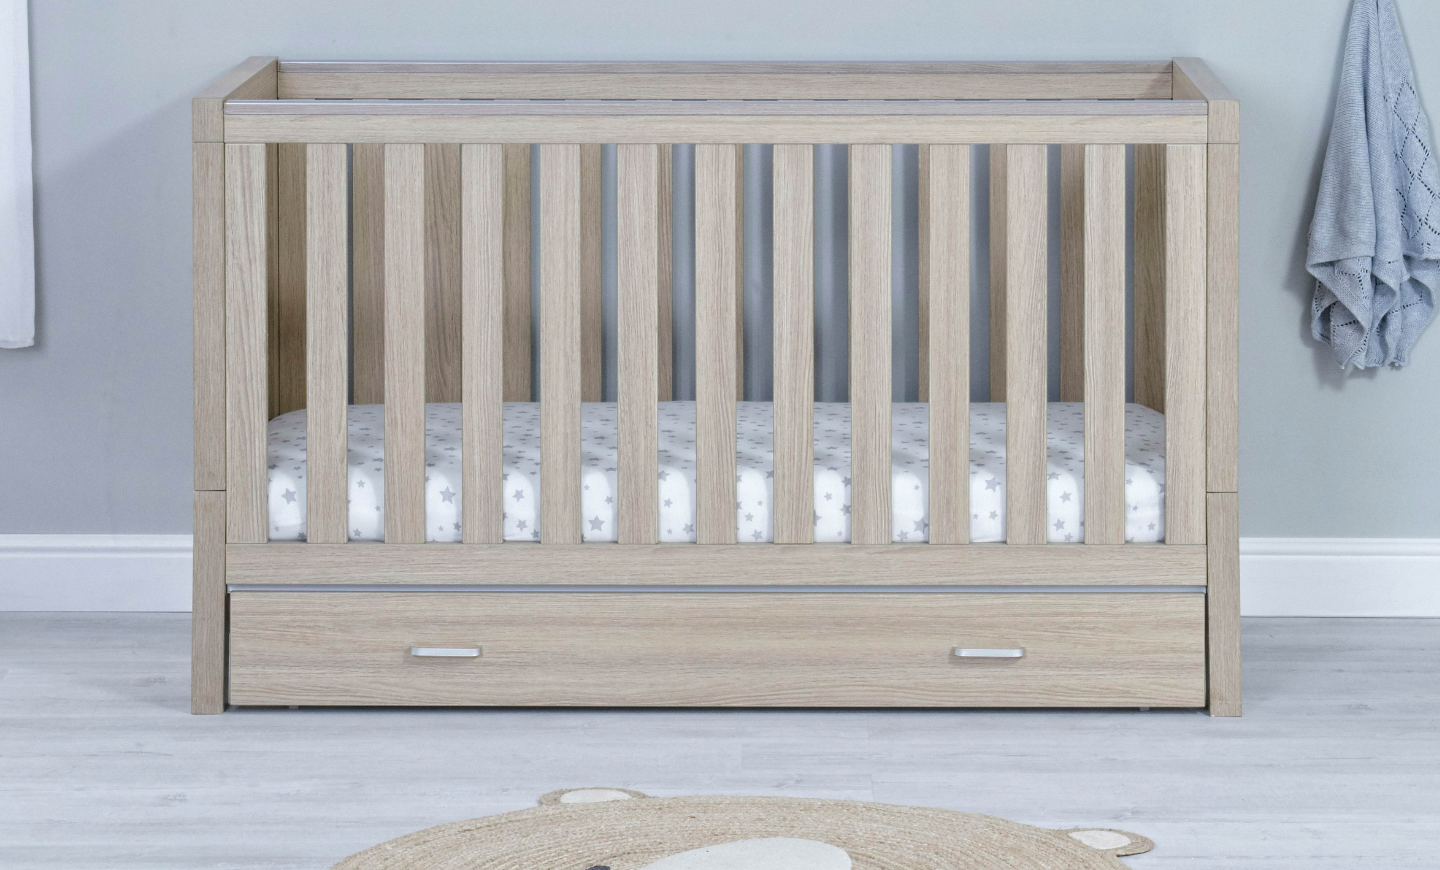 What is the difference between a cot and cot bed